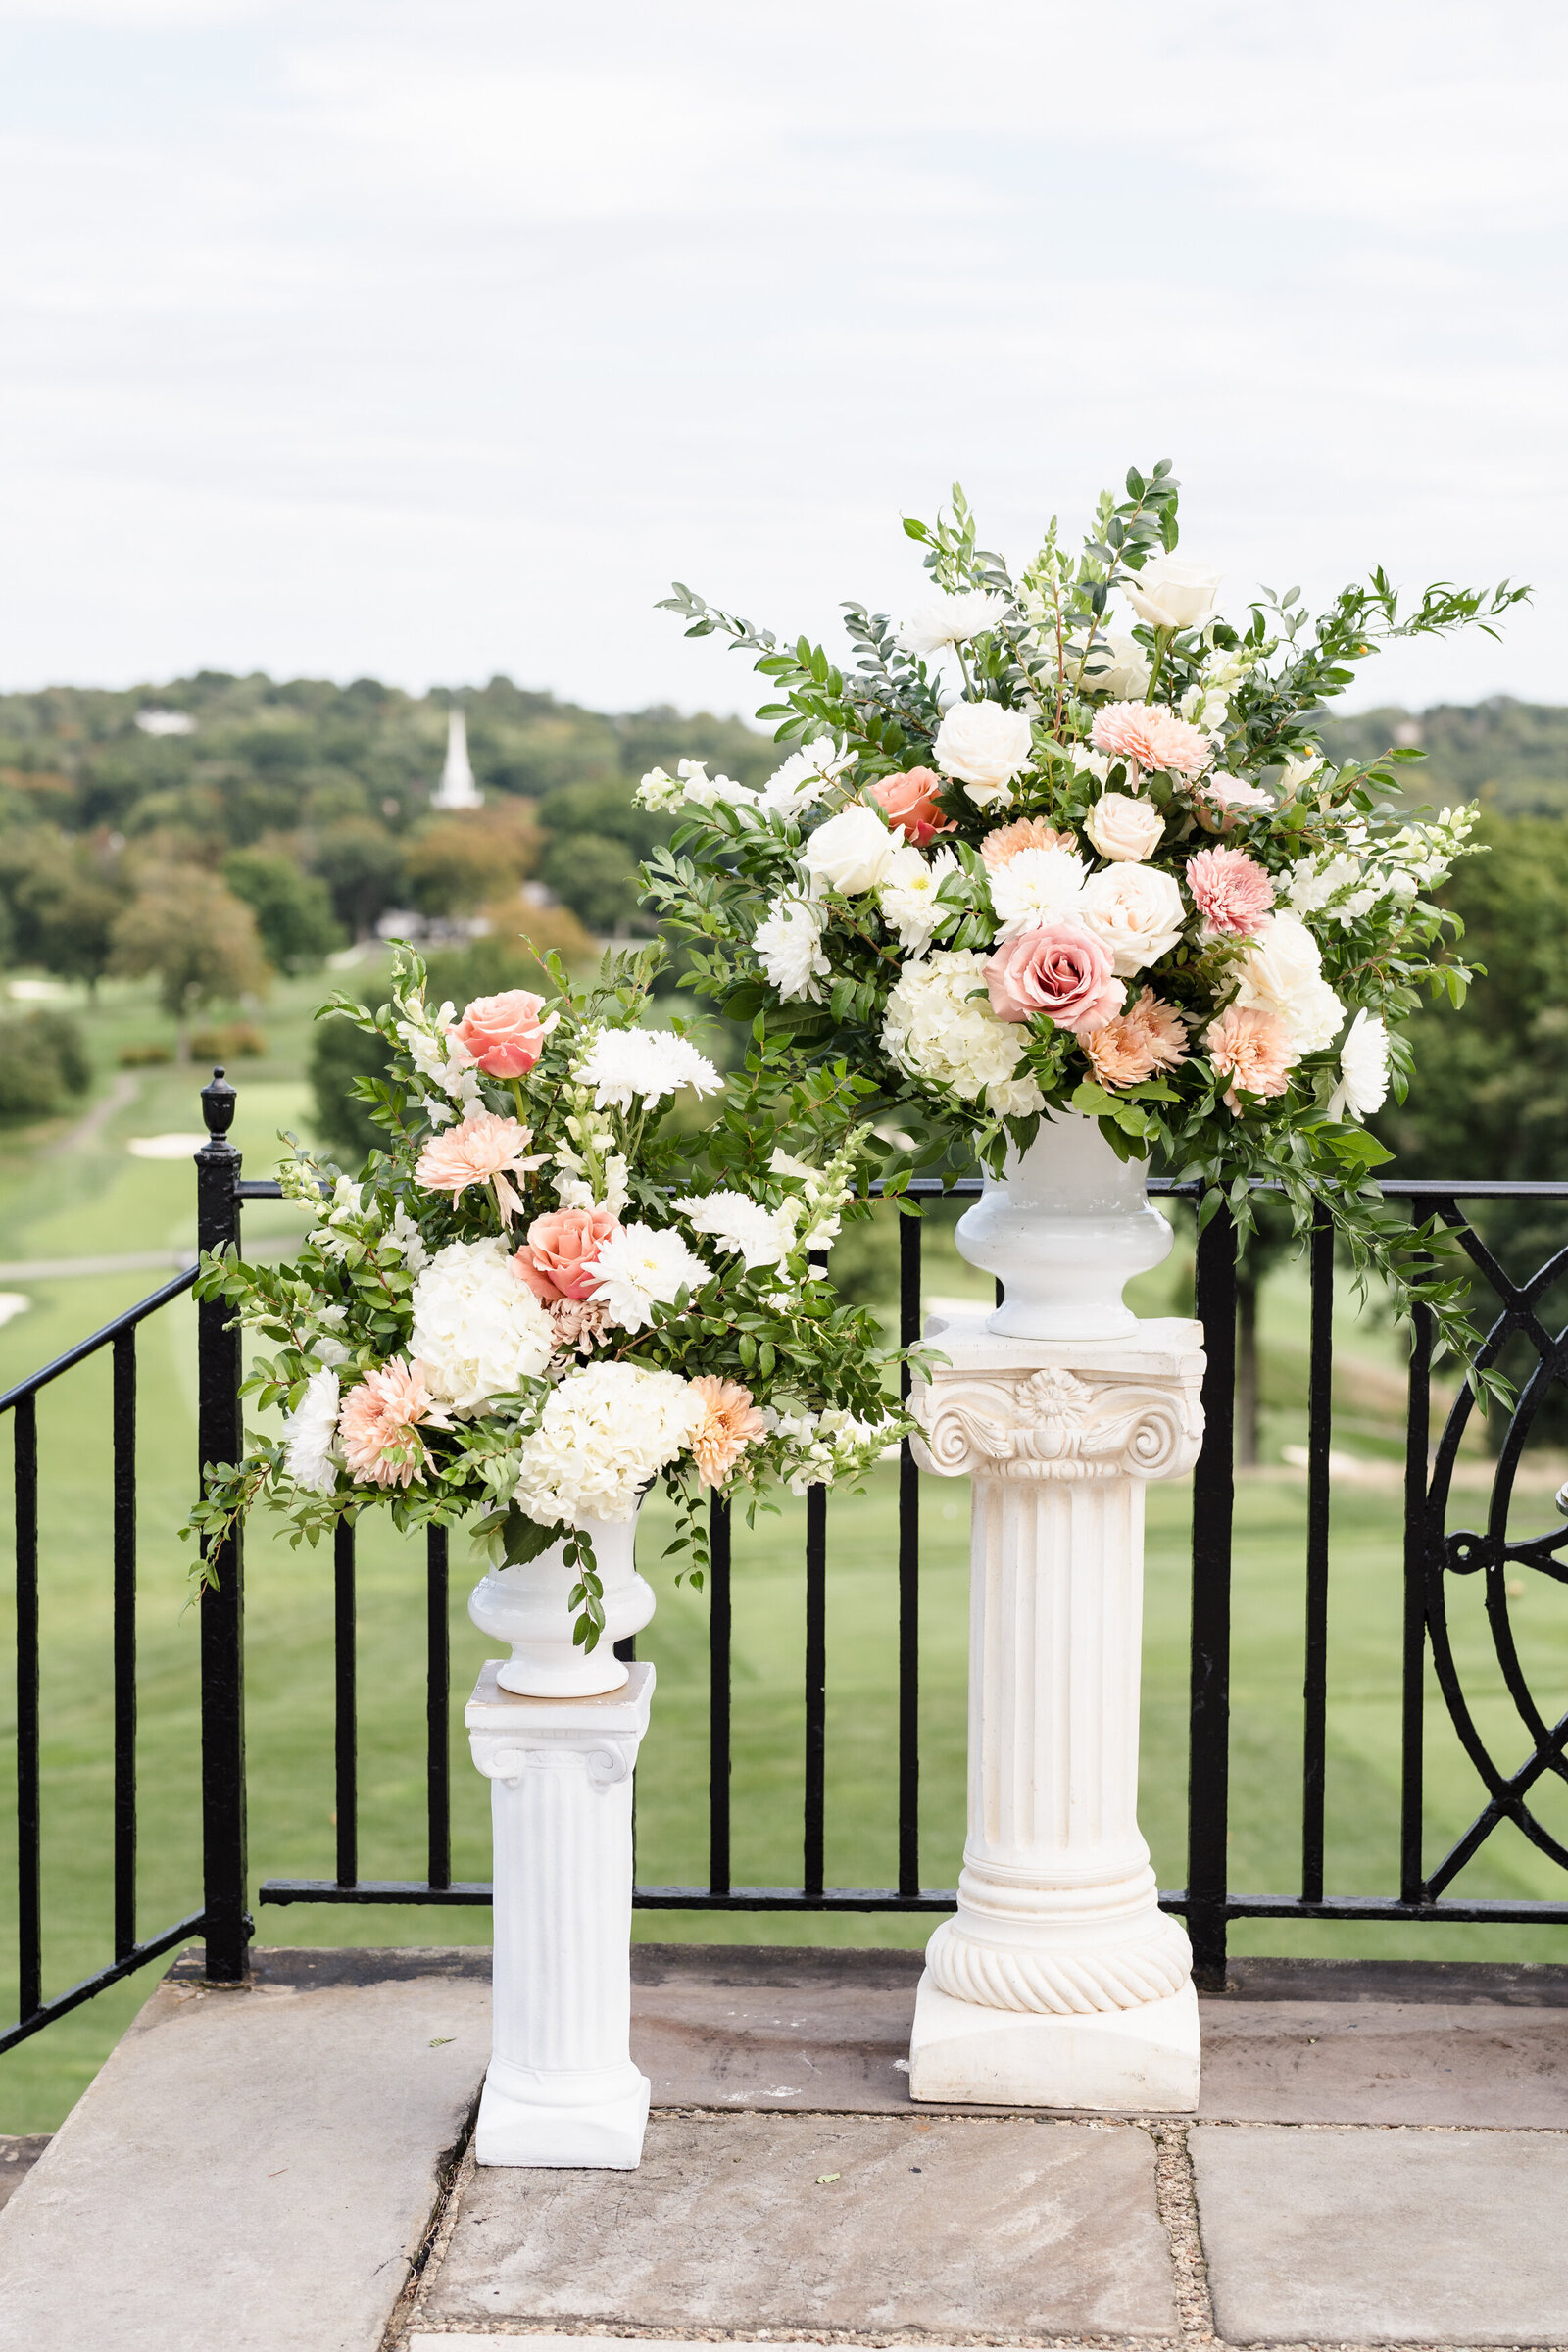 Large floral arrangements stand at the front of the ceremony space overlooking a golf course